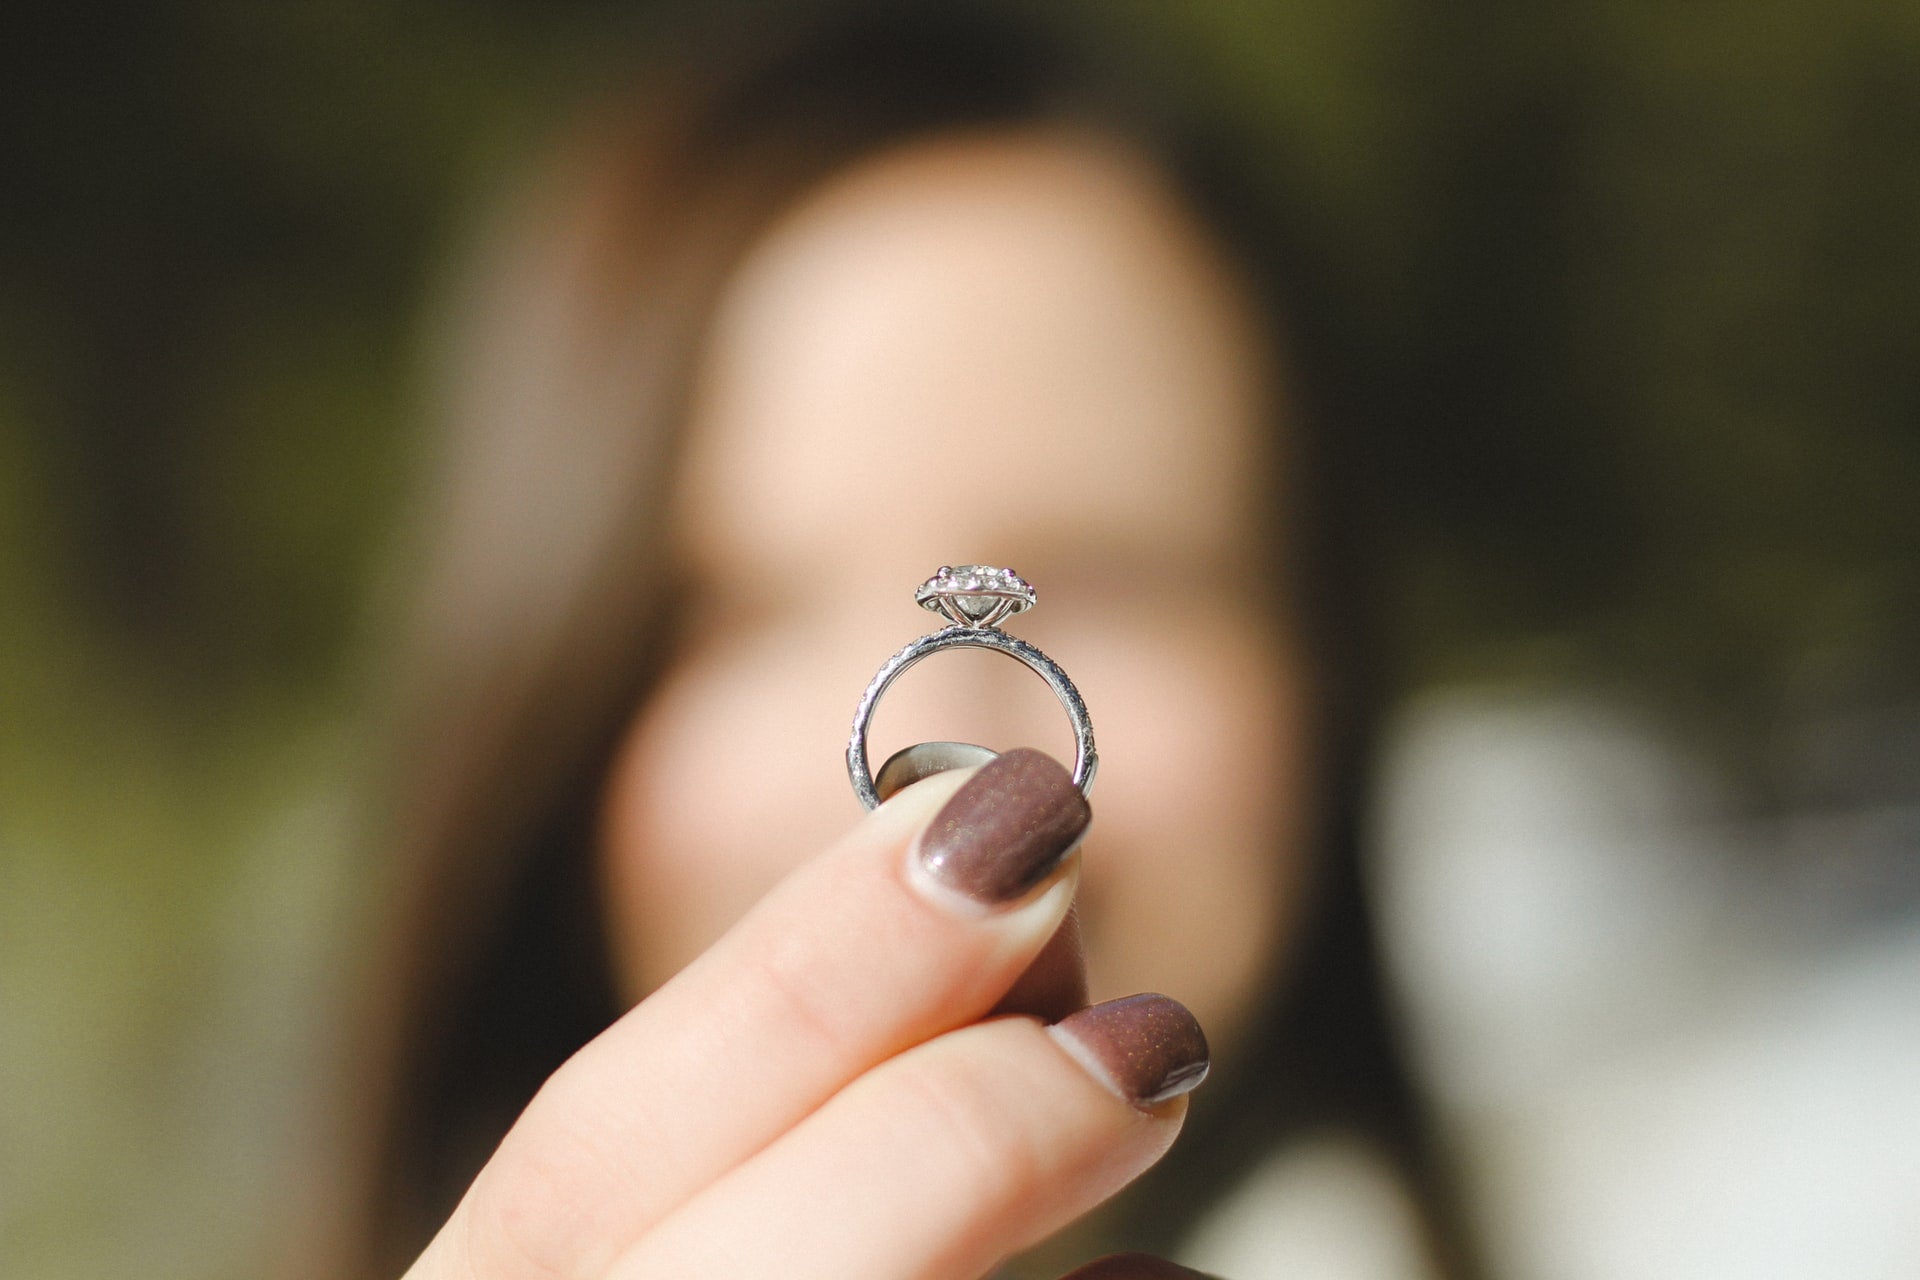 5 Activities to Avoid When Wearing a Wedding Ring